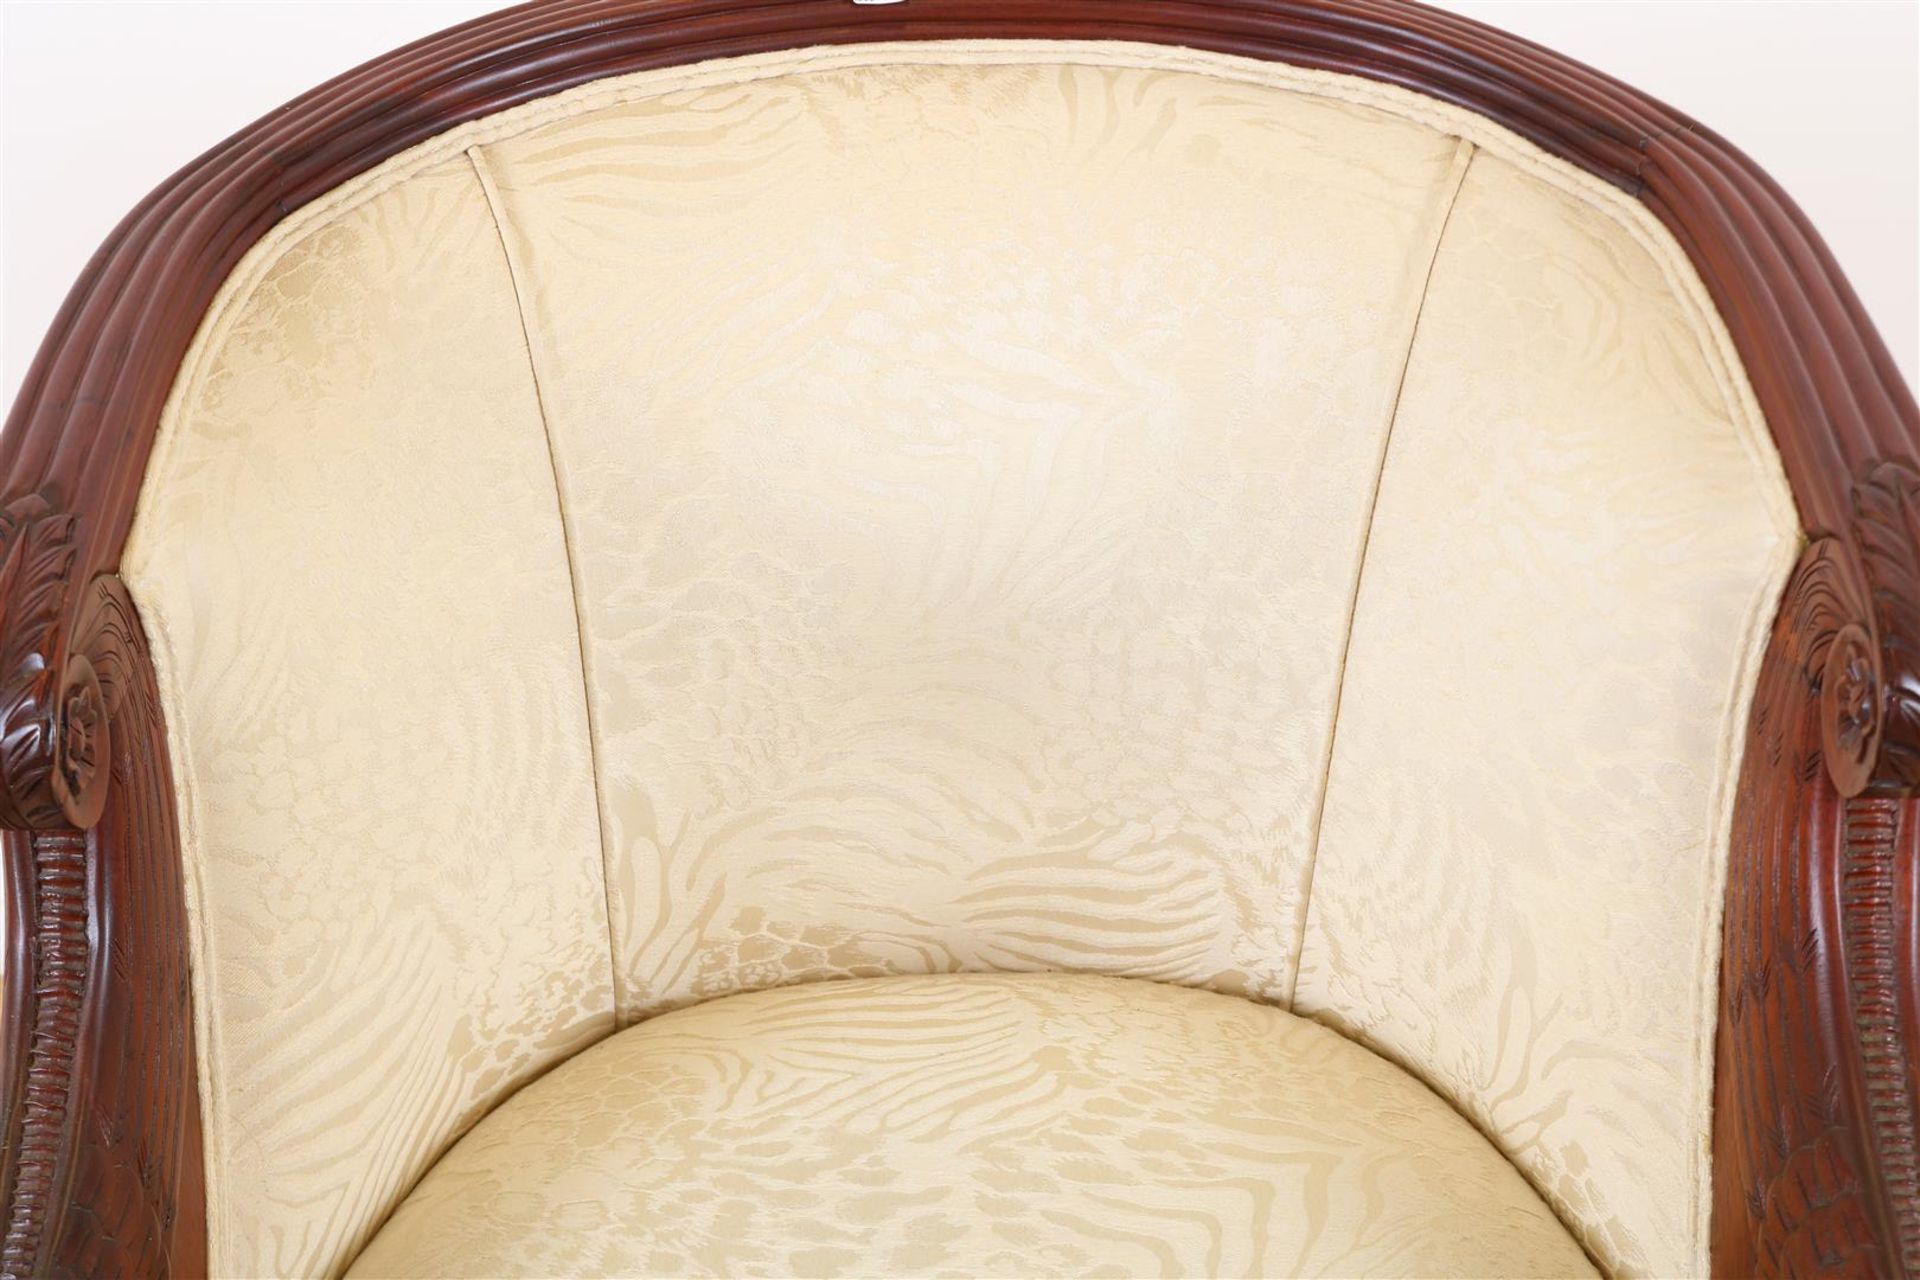 Mahogany Empire style armchair with cream fabric and stabbed swans, 20th century. - Image 2 of 5